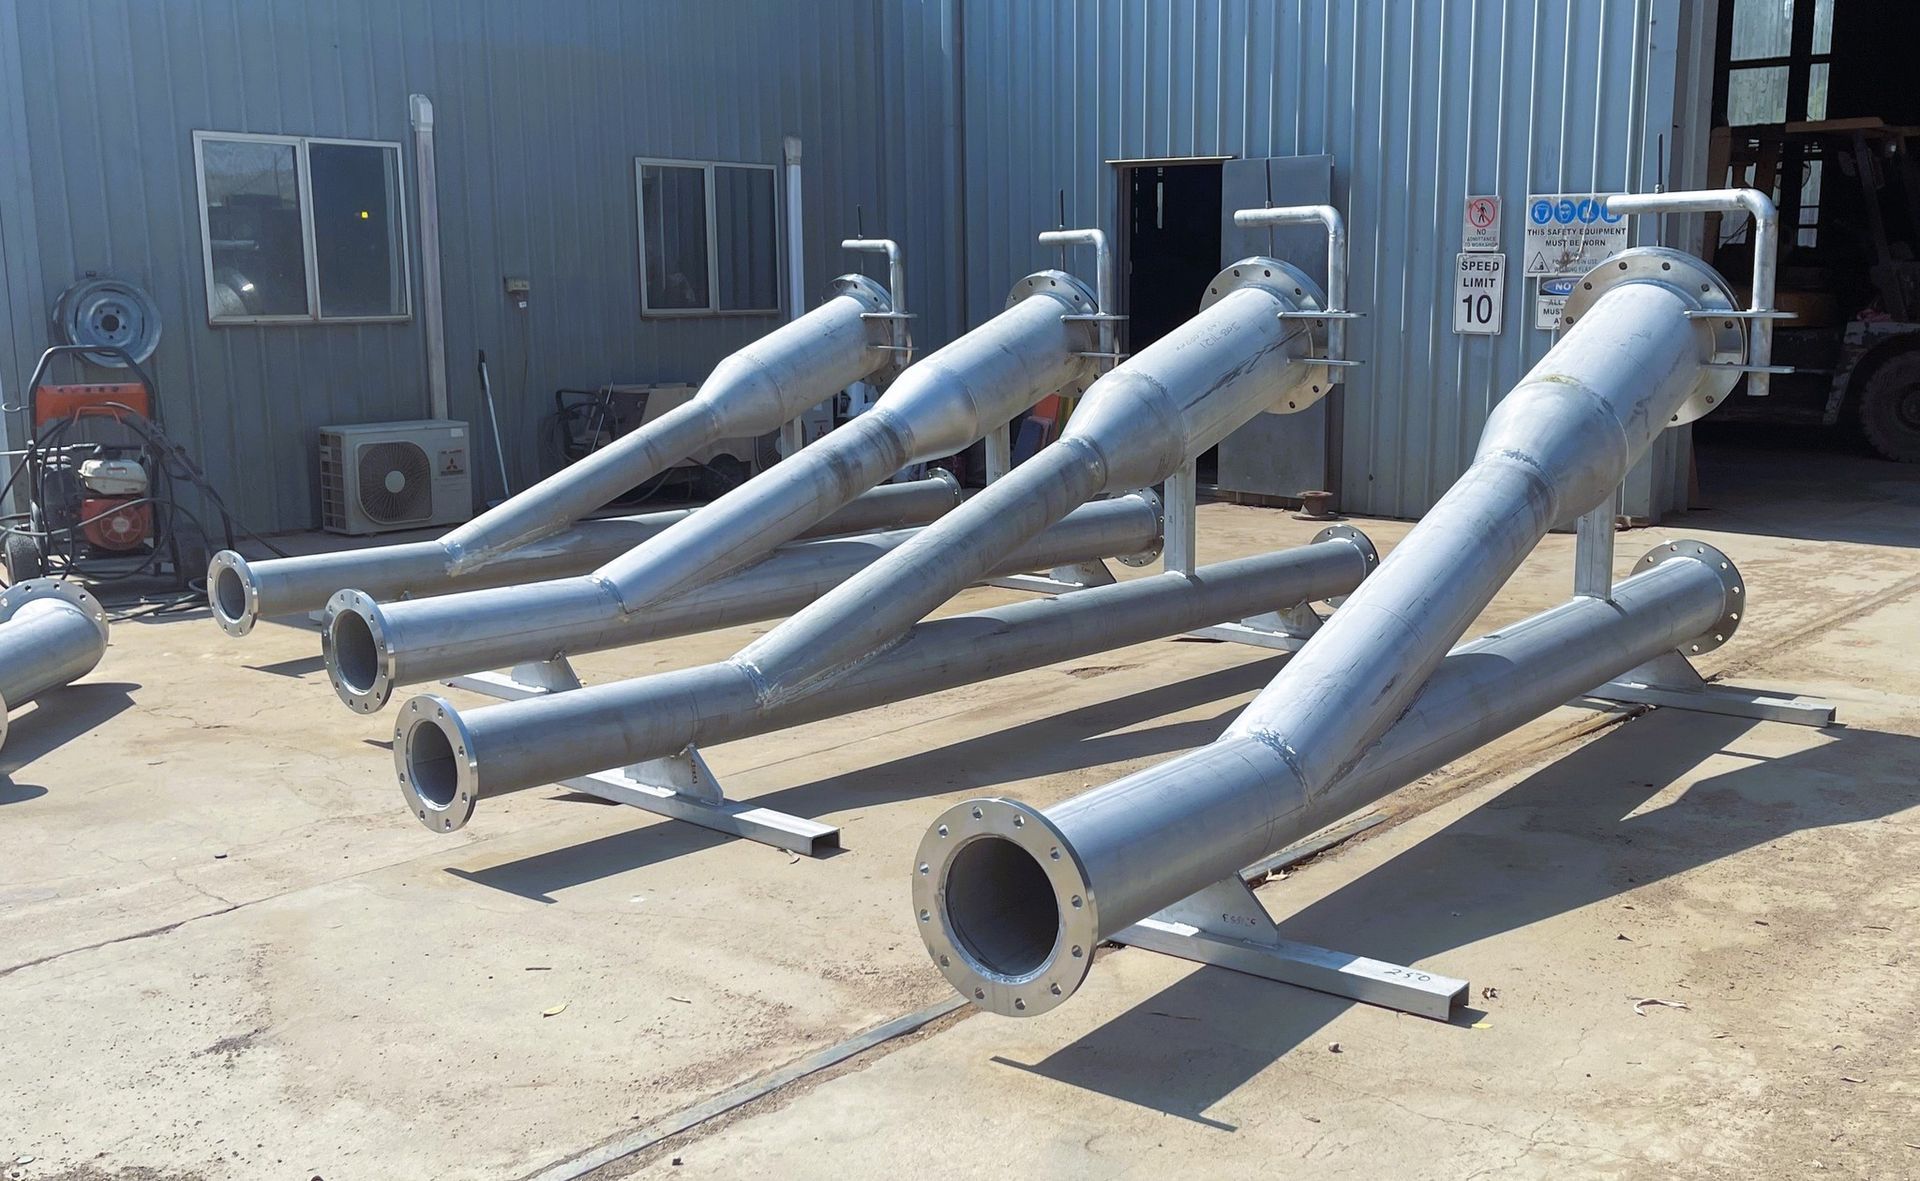 Several Metal Pipes Outside a Building